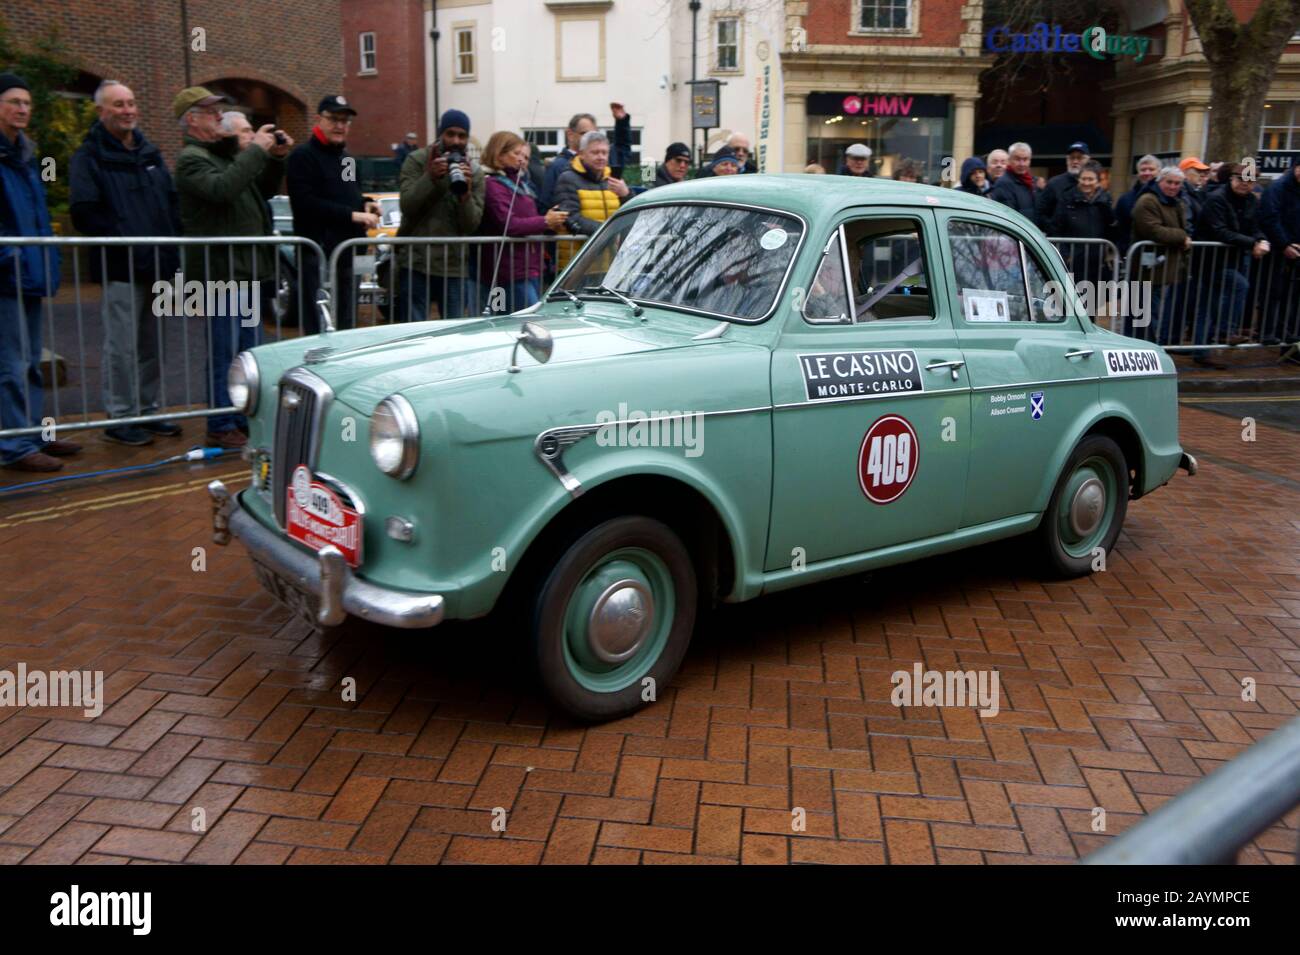 Car Number 409 leaving Passage Control in Banbury of the Rallye Monte-Carlo Historique Stock Photo